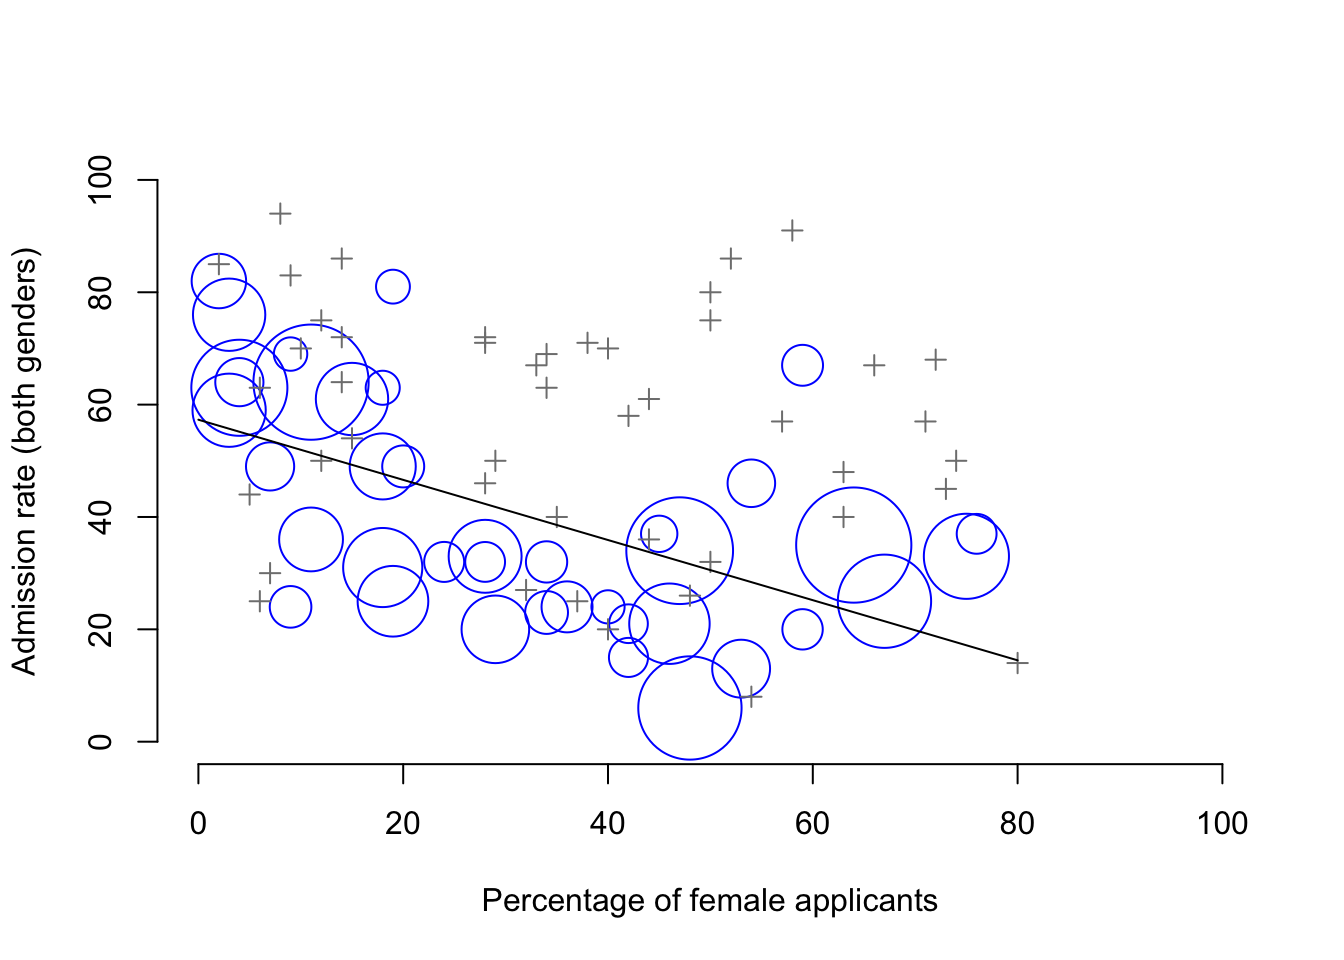 The Berkeley 1973 college admissions data. This figure plots the admission rate for the 85 departments that had at least one female applicant, as a function of the percentage of applicants that were female. The plot is a redrawing of Figure 1 from @Bickel1975. Circles plot departments with more than 40 applicants; the area of the circle is proportional to the total number of applicants. The crosses plot department with fewer than 40 applicants.